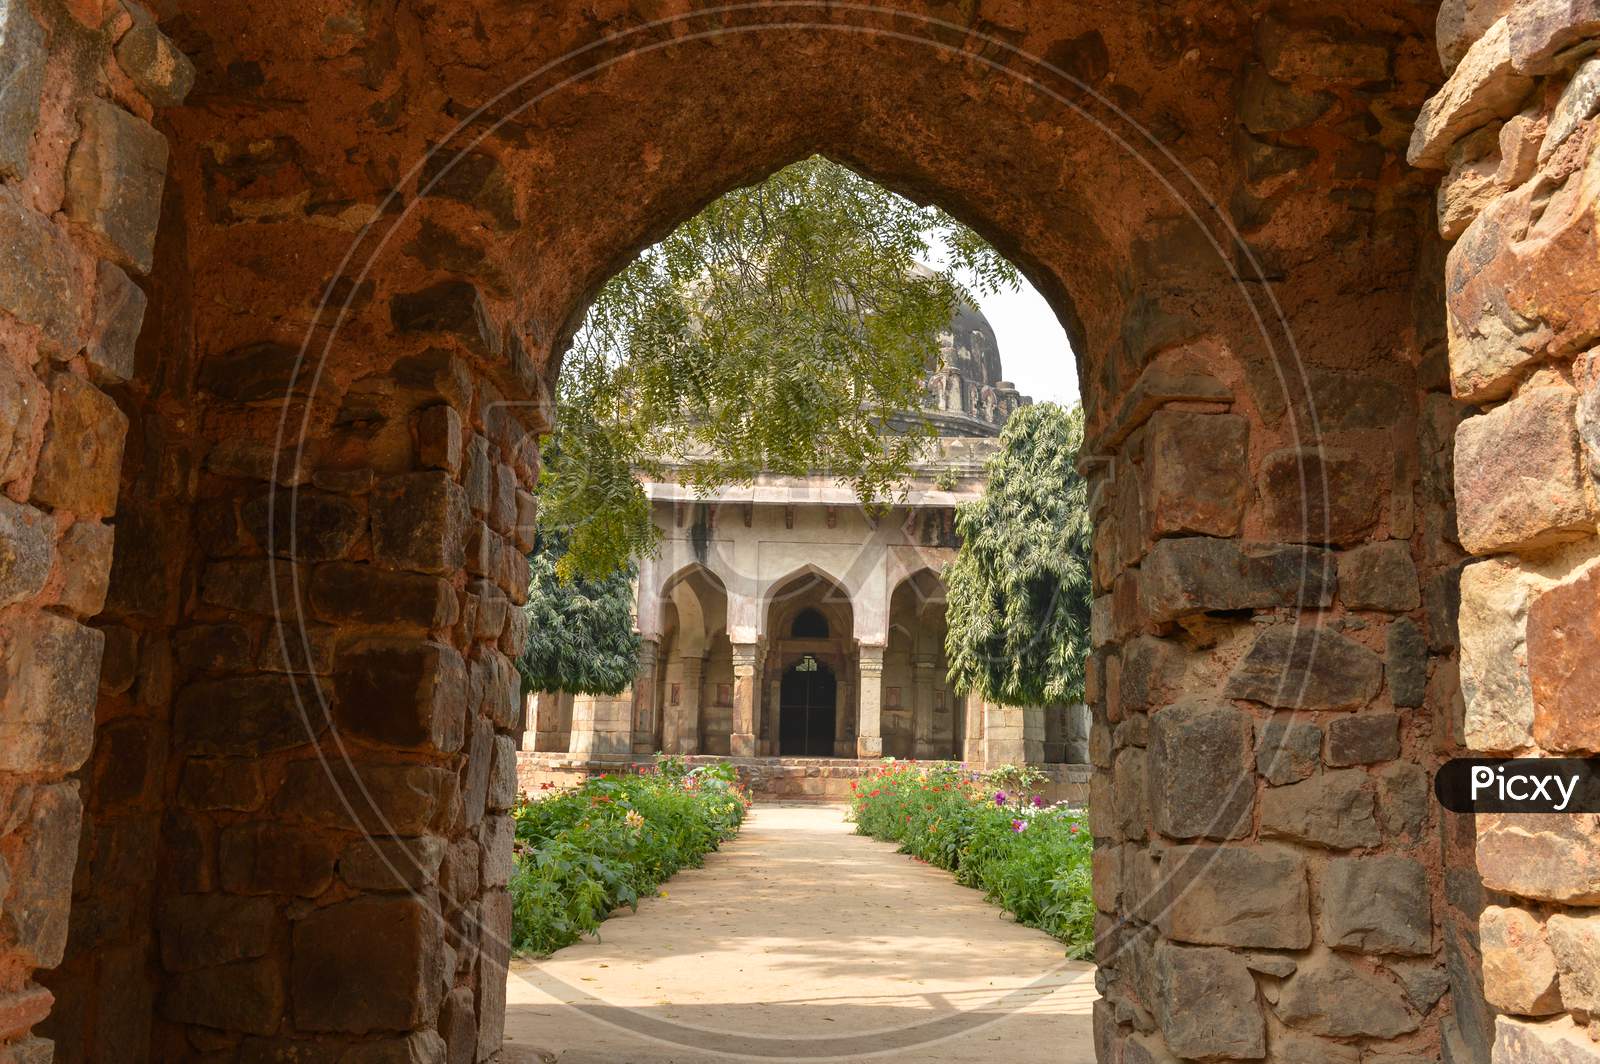 A Tomb Of Sikandar Lodhi Monument At Lodi Garden Or Lodhi Gardens In A City Park From The Side Of The Lawn At Winter Foggy Morning.